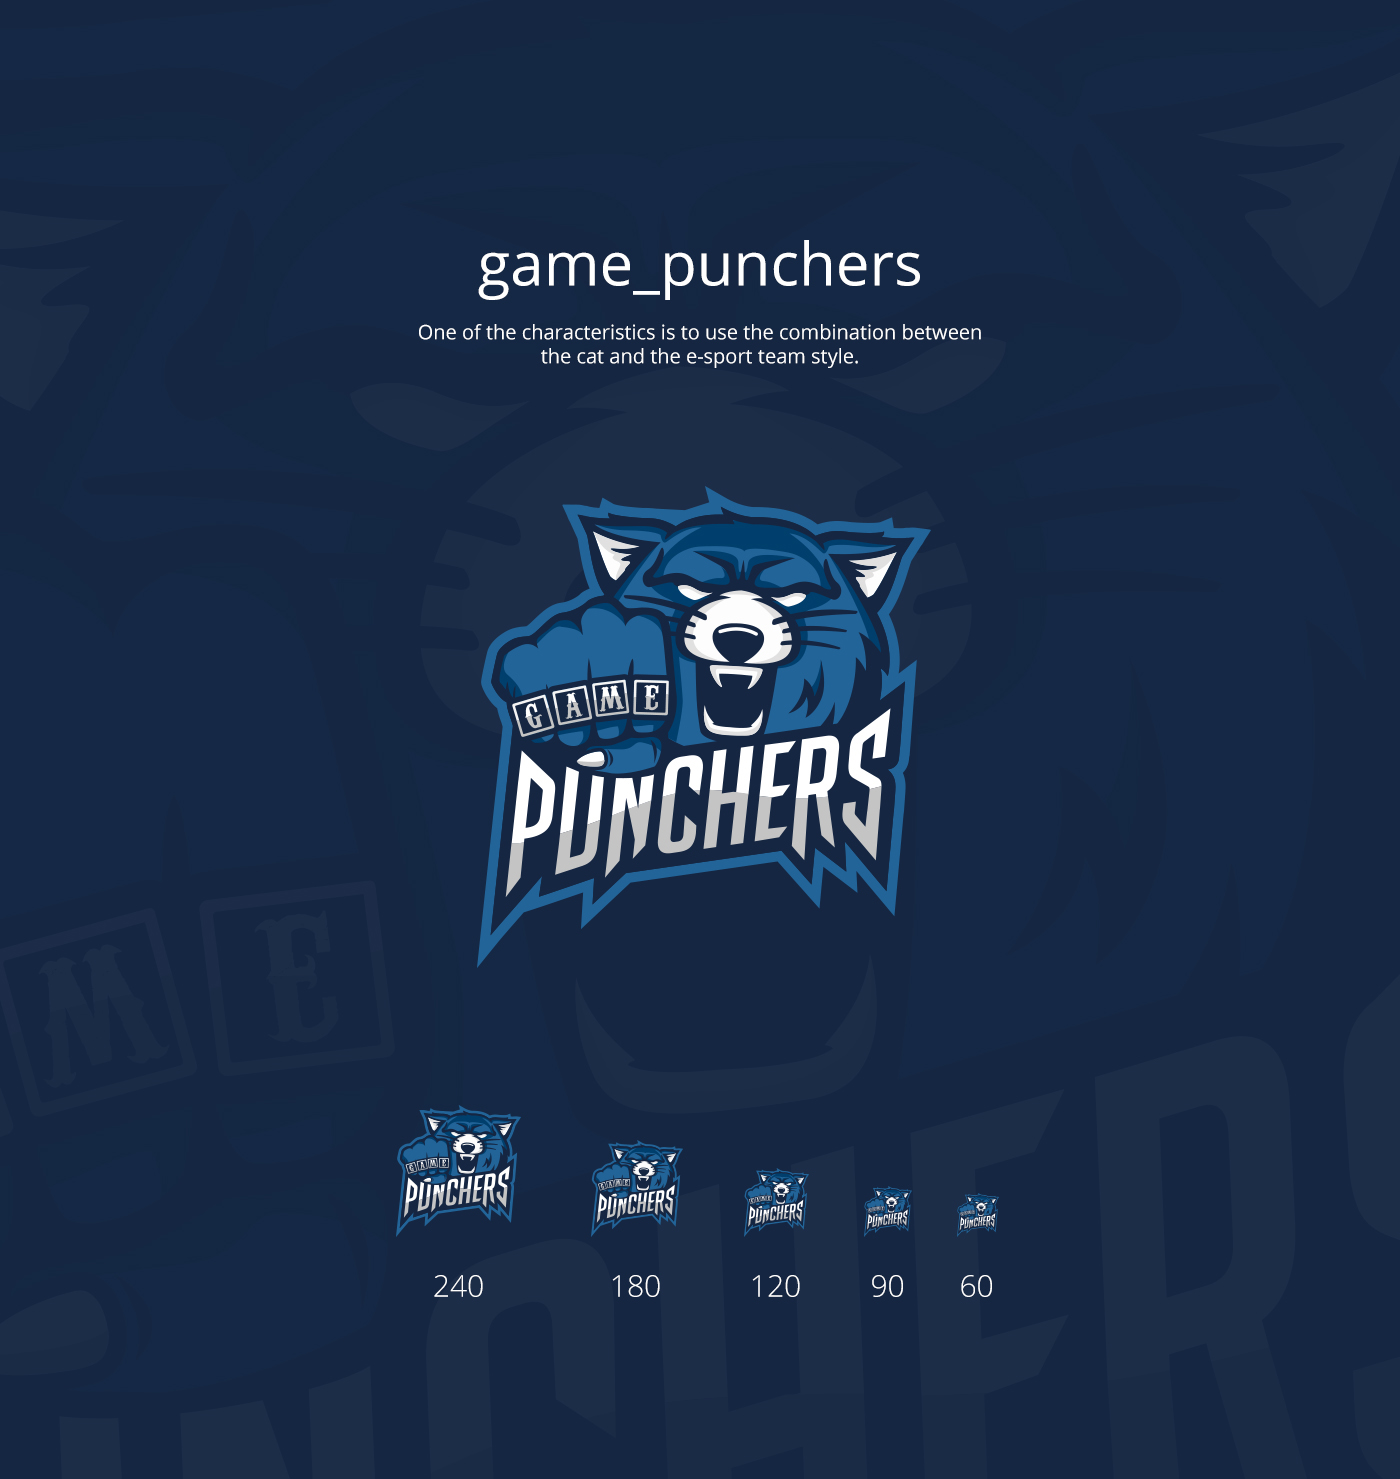 gamepunchers game punchers esport team Cat angry punch video game